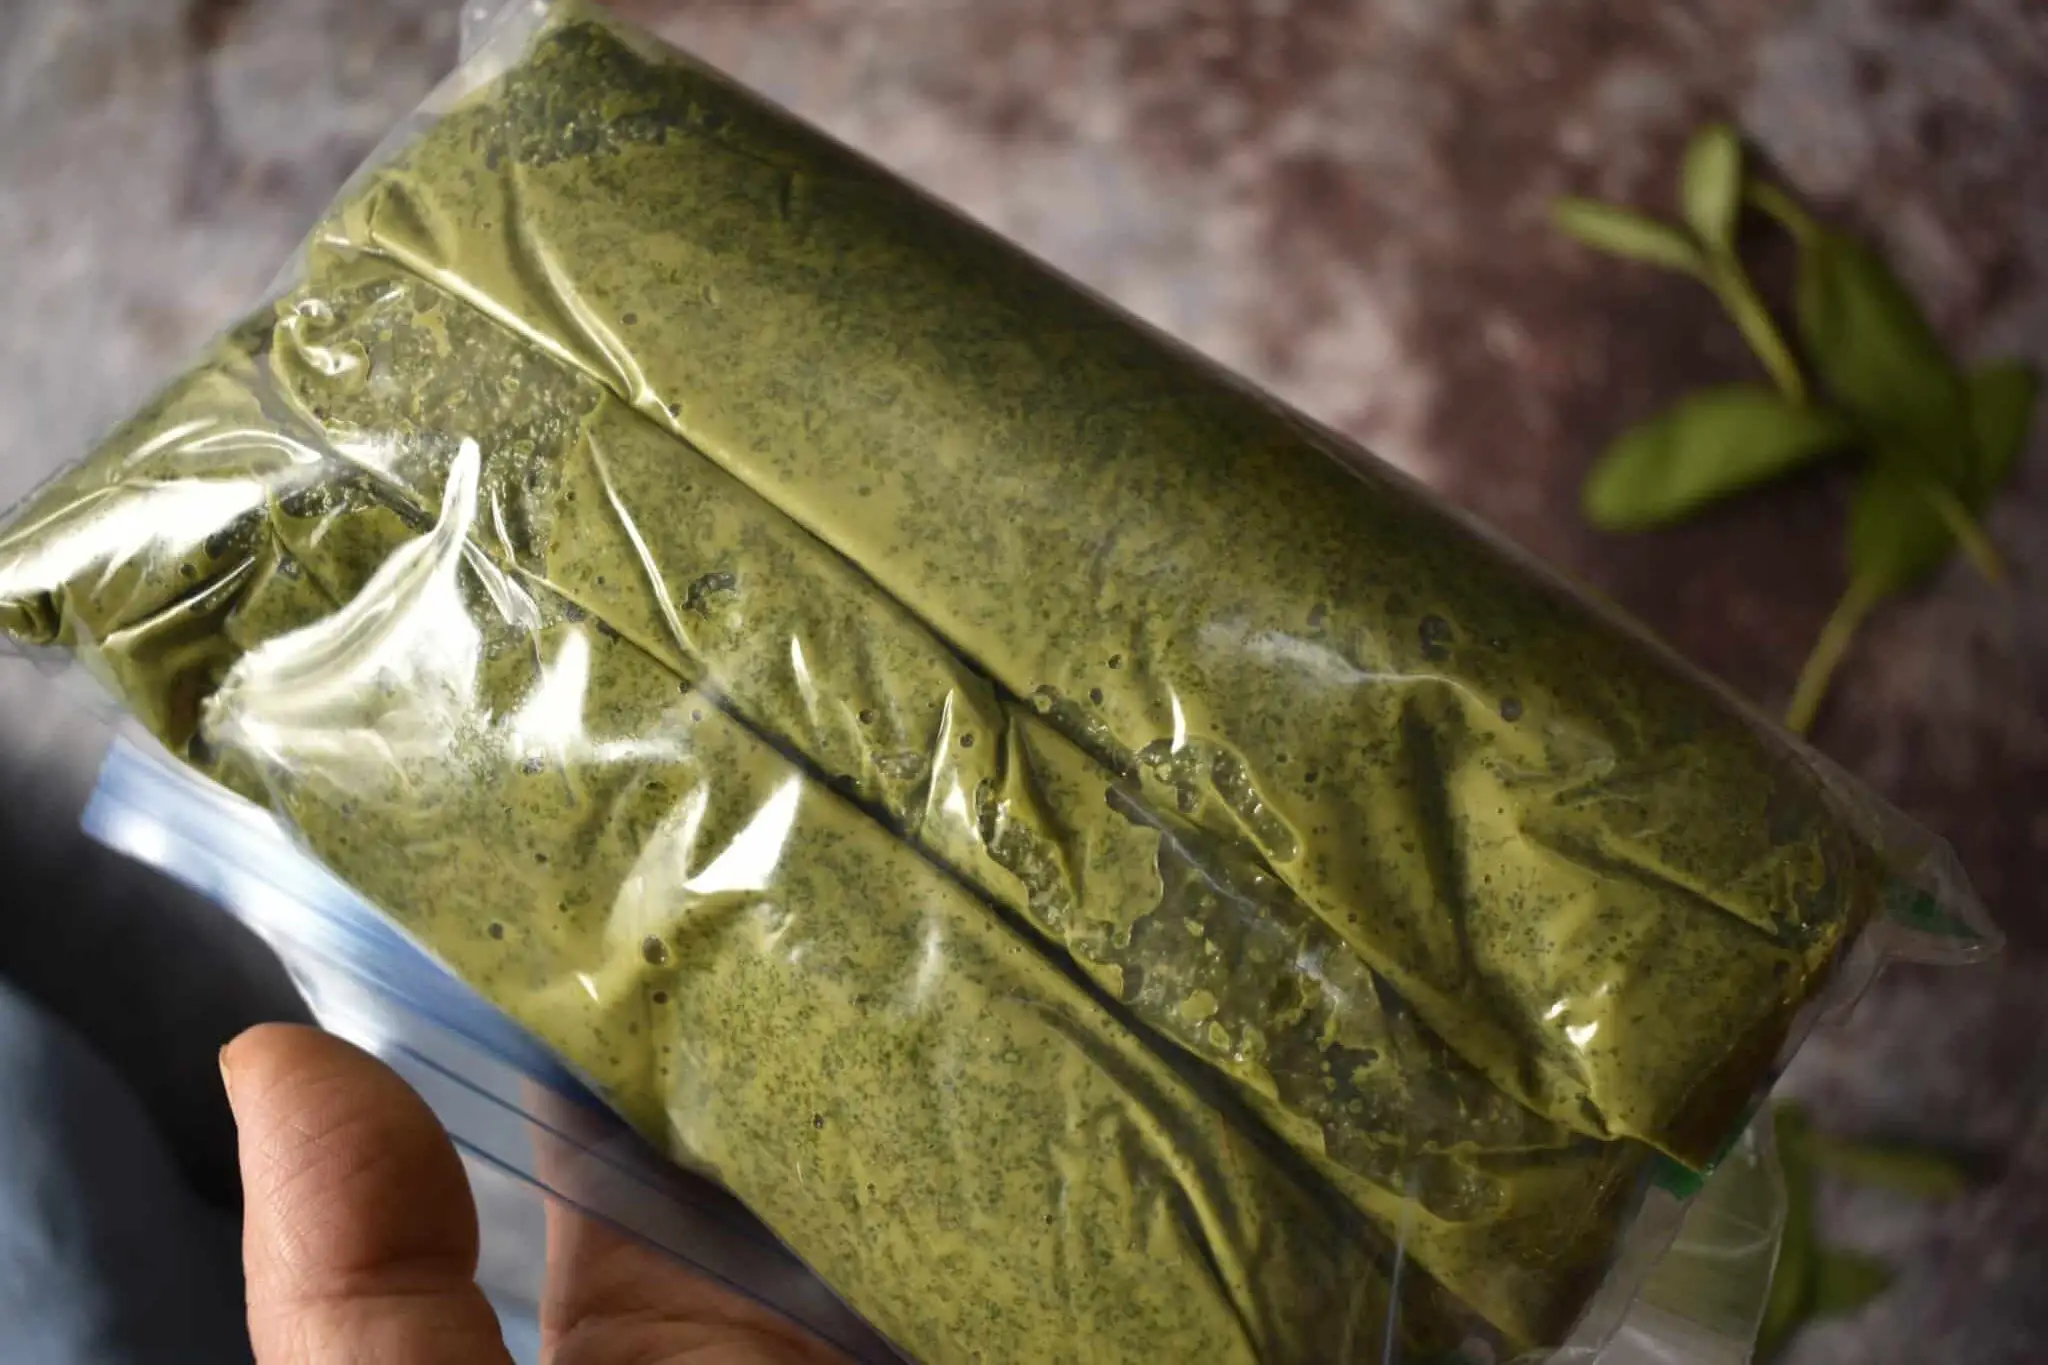 store fresh herb {basil or sage) pesto in snack size bags